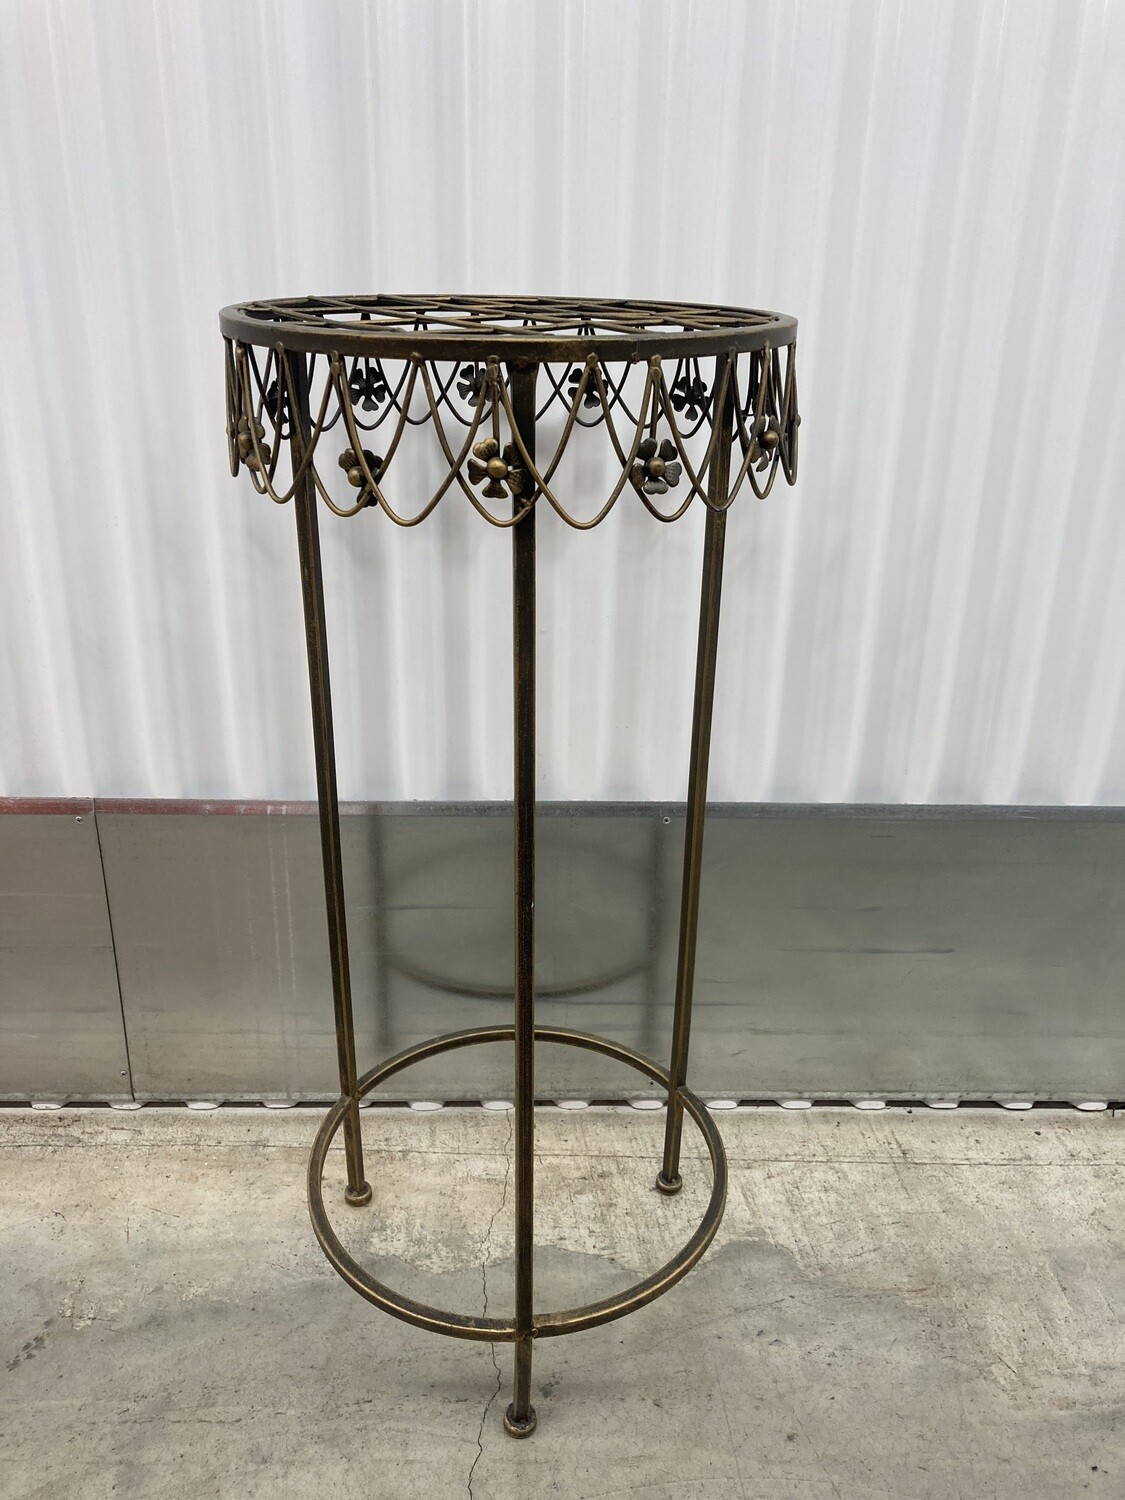 Metal Plant Stand, 28"H #2199